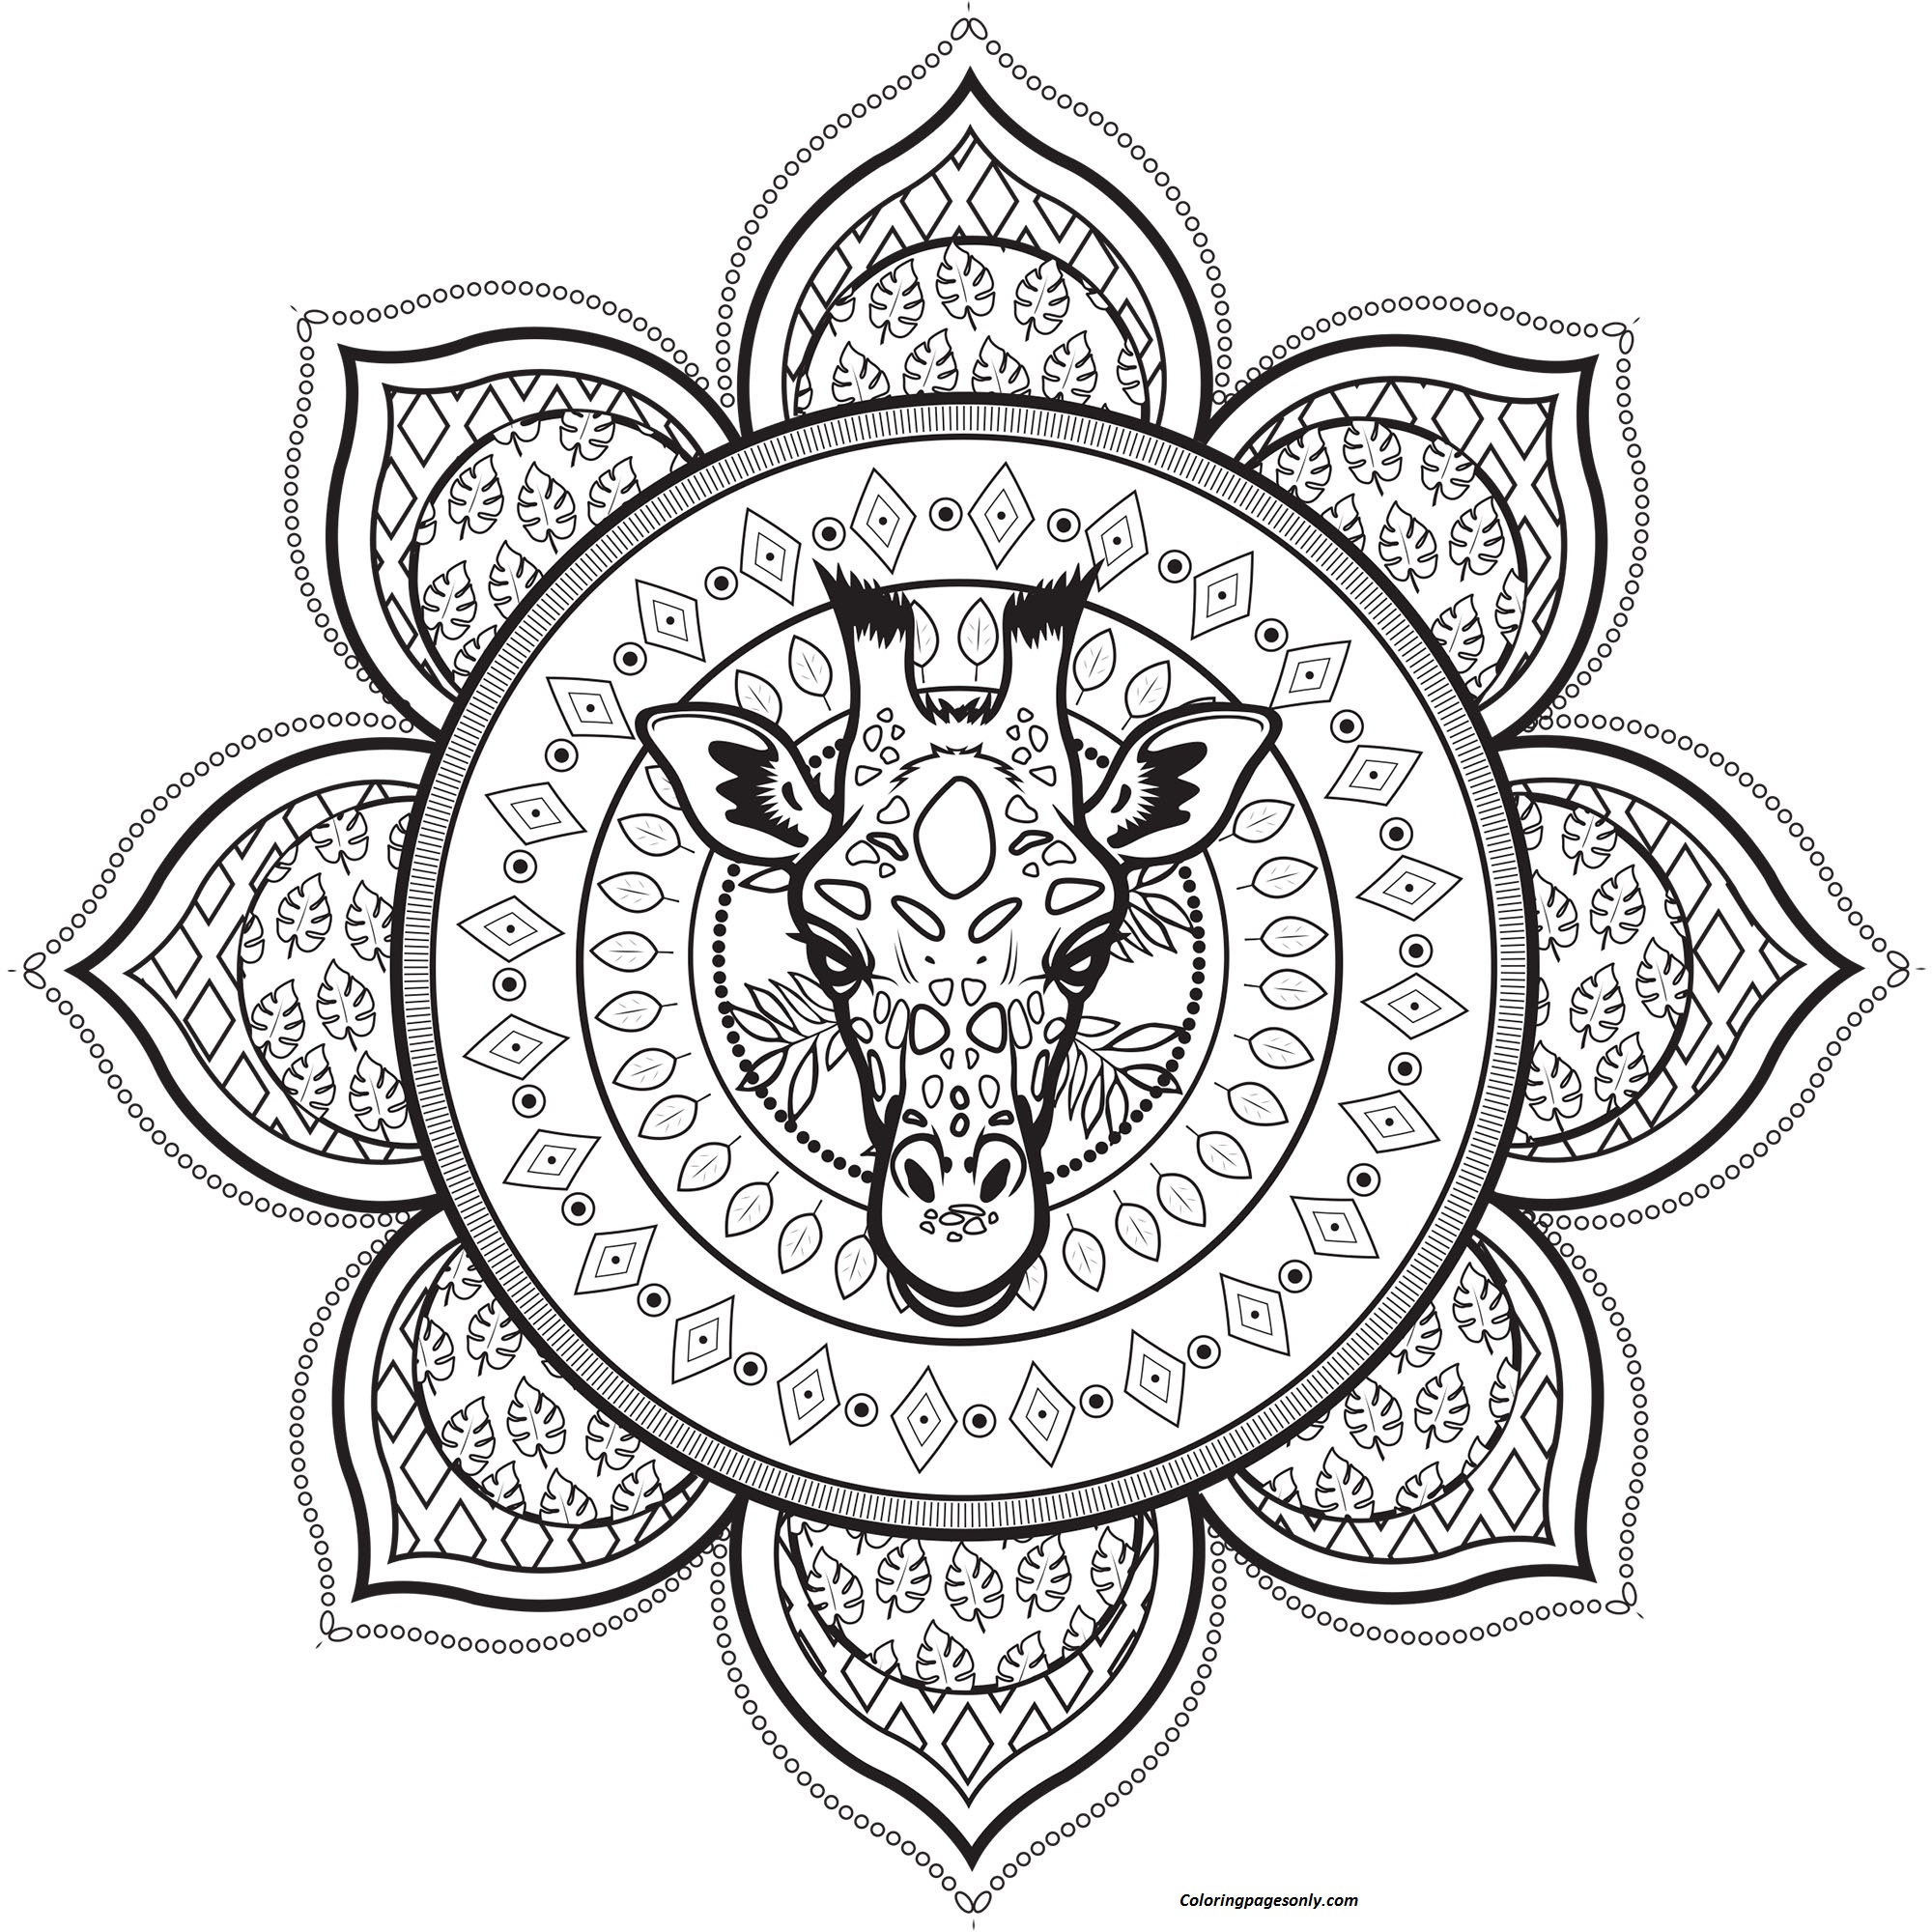 Download Mandala With A Giraffe Coloring Pages Mandala Coloring Pages Free Printable Coloring Pages Online